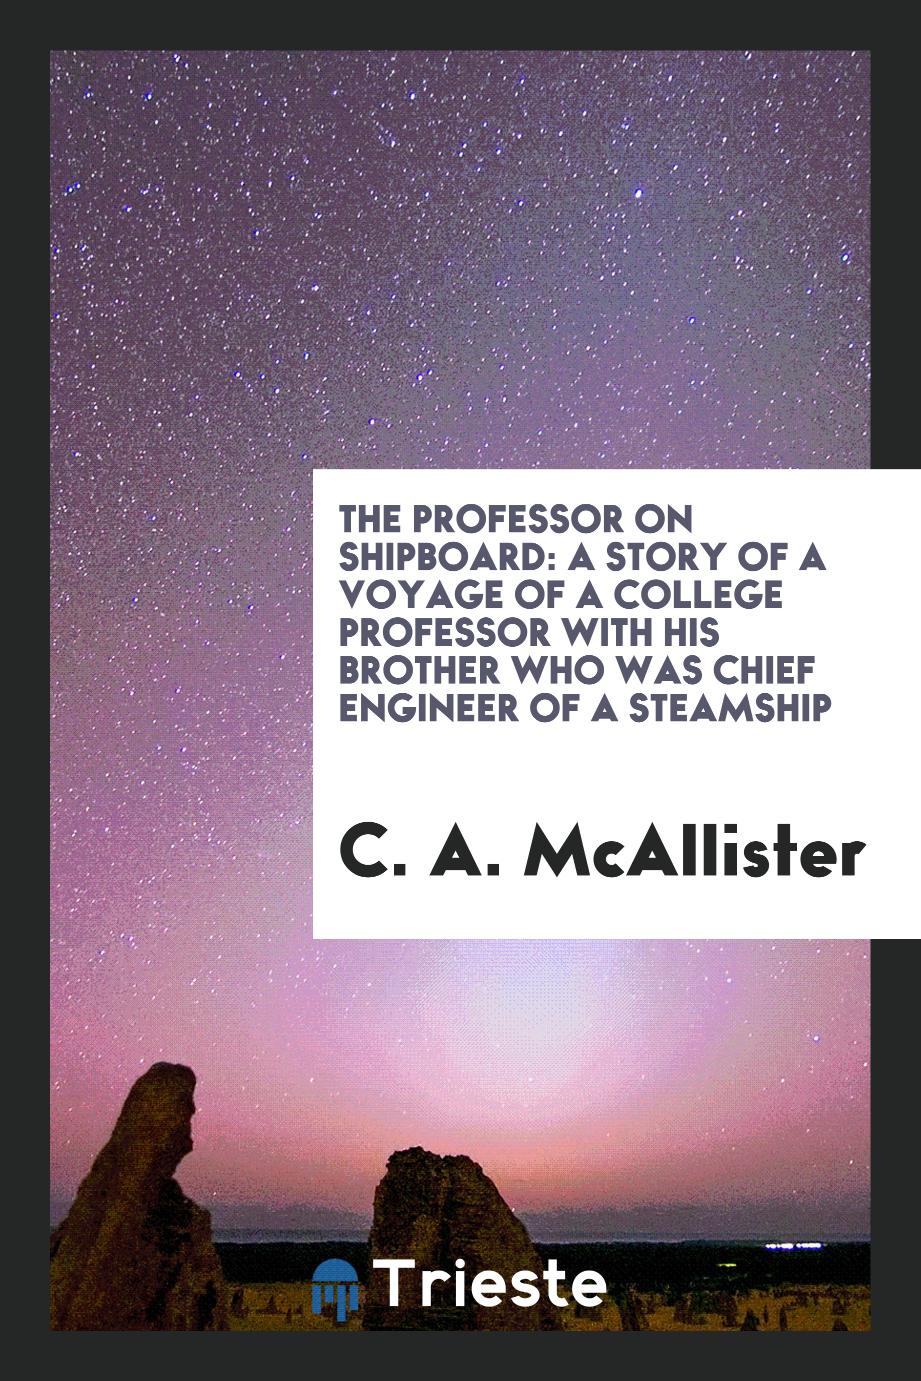 The Professor on Shipboard: A Story of a Voyage of a College Professor with His Brother Who Was Chief Engineer of a Steamship